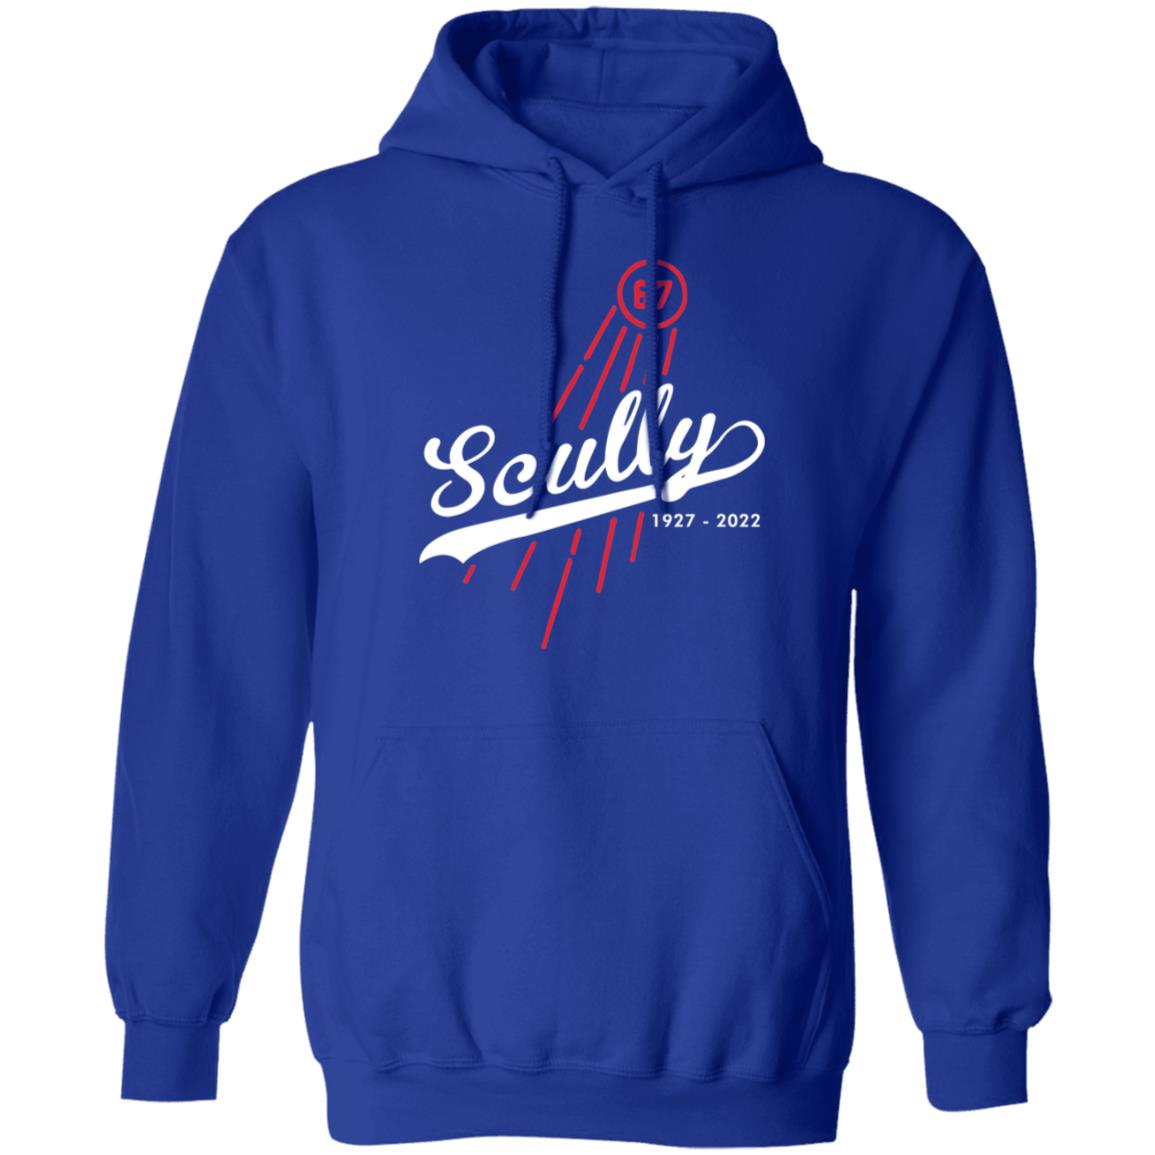 Thank you vin scully 67 memories t-shirt, hoodie, sweater, long sleeve and  tank top